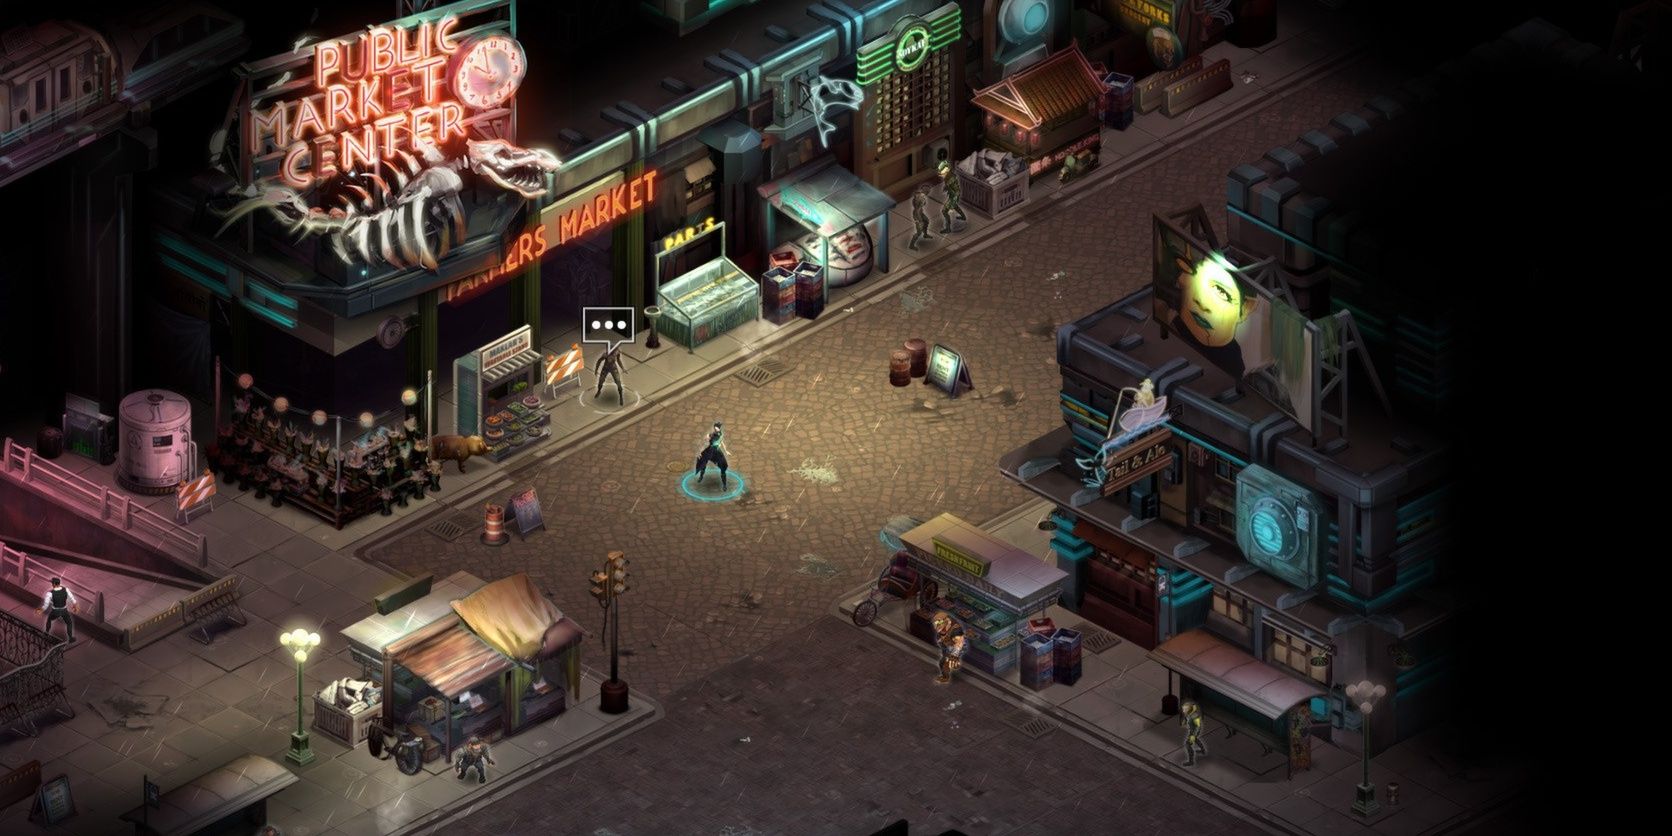 A screenshot showing gameplay in the Shadowrun Trilogy